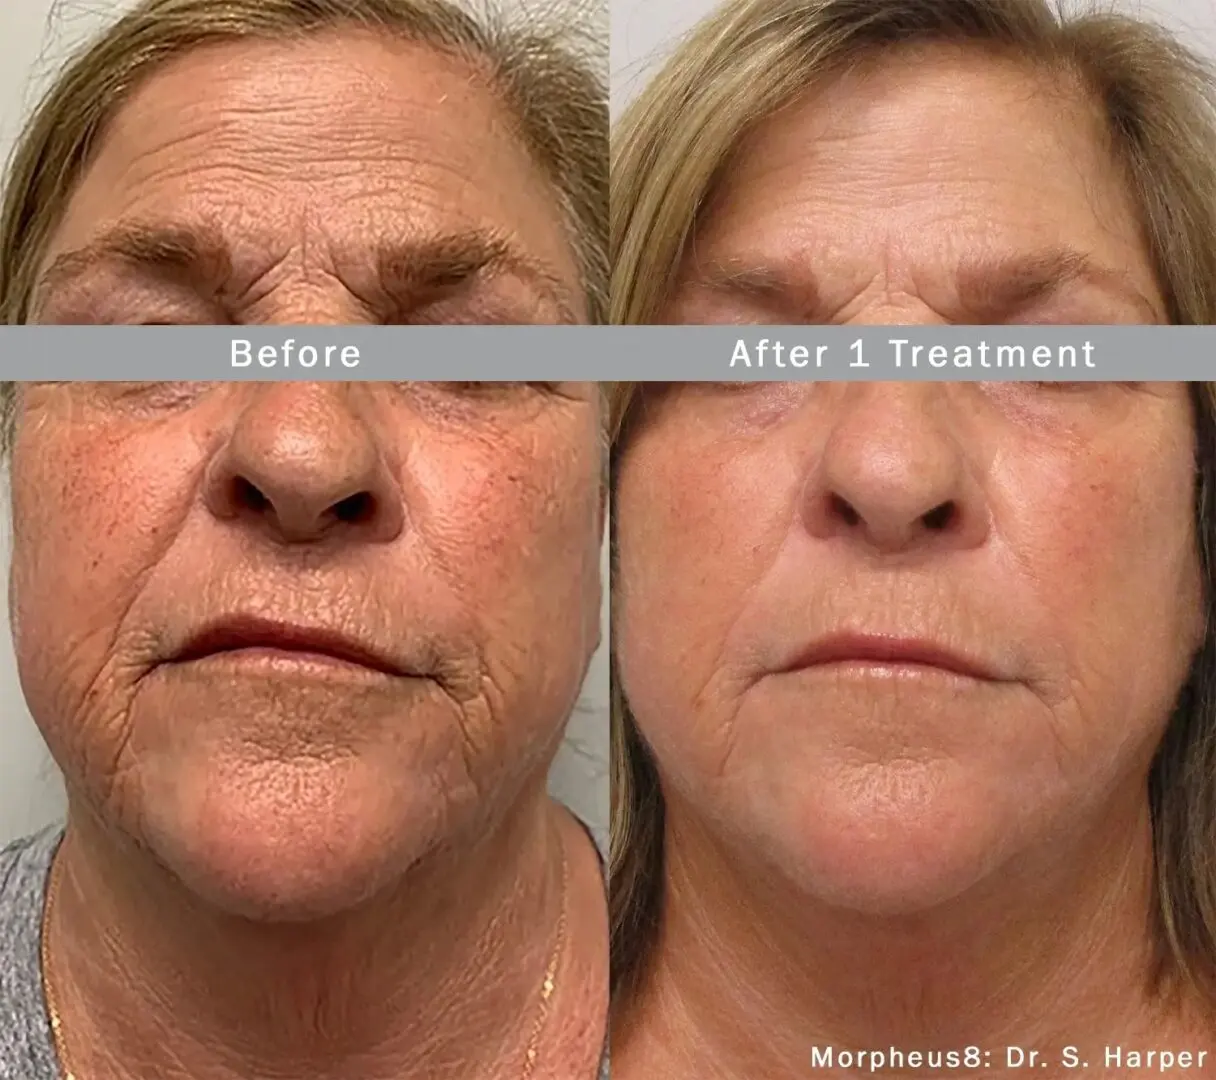 Before and after pictures under one treatment